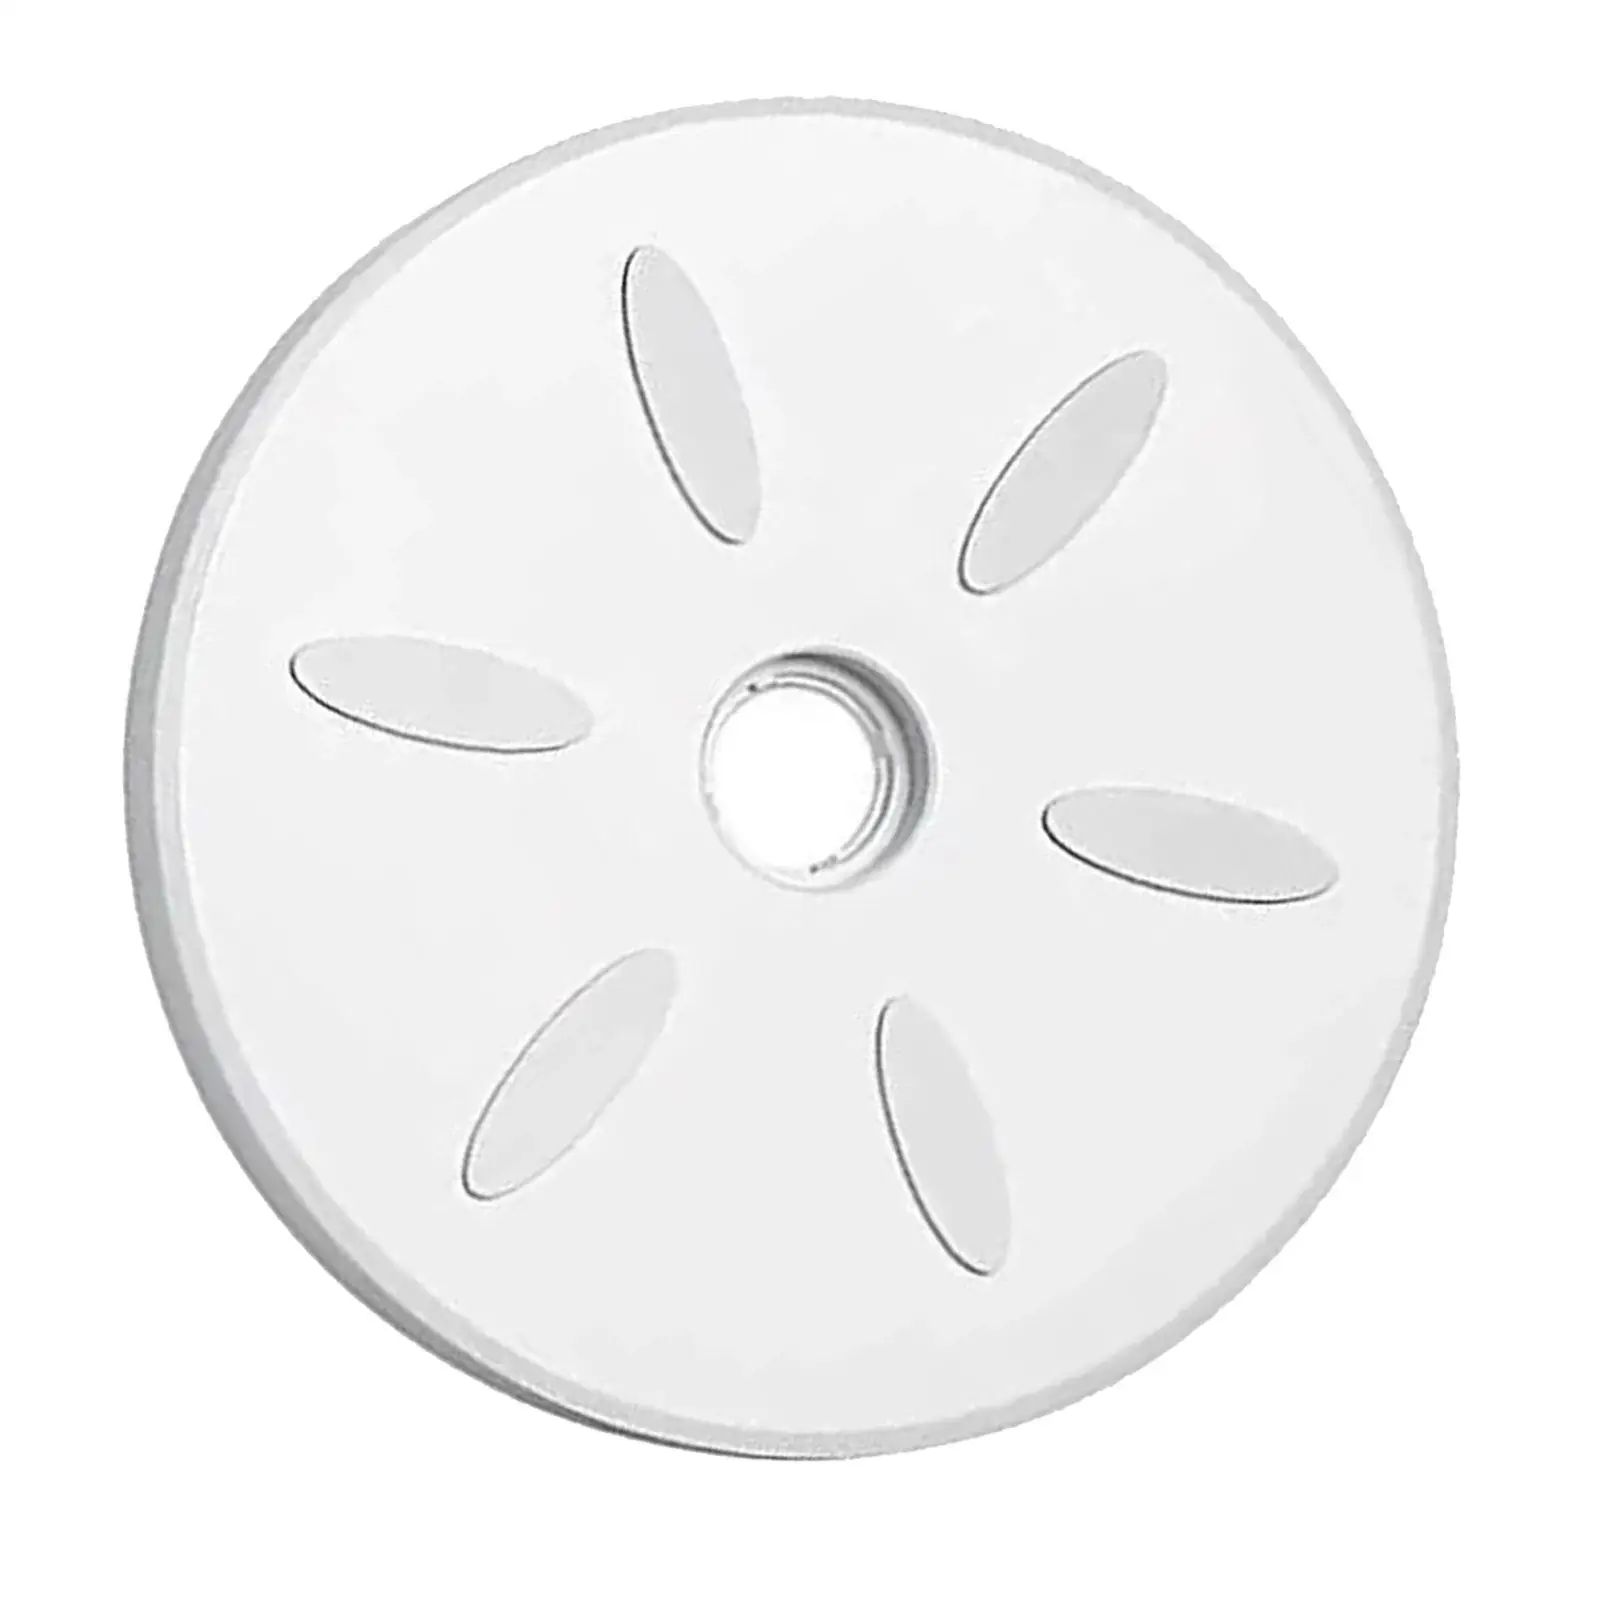 C6 Large Wheel Durable Practical Easy to Install Swimming Pool Cleaner Wheel for 180 Swimming Pool Cleaner System